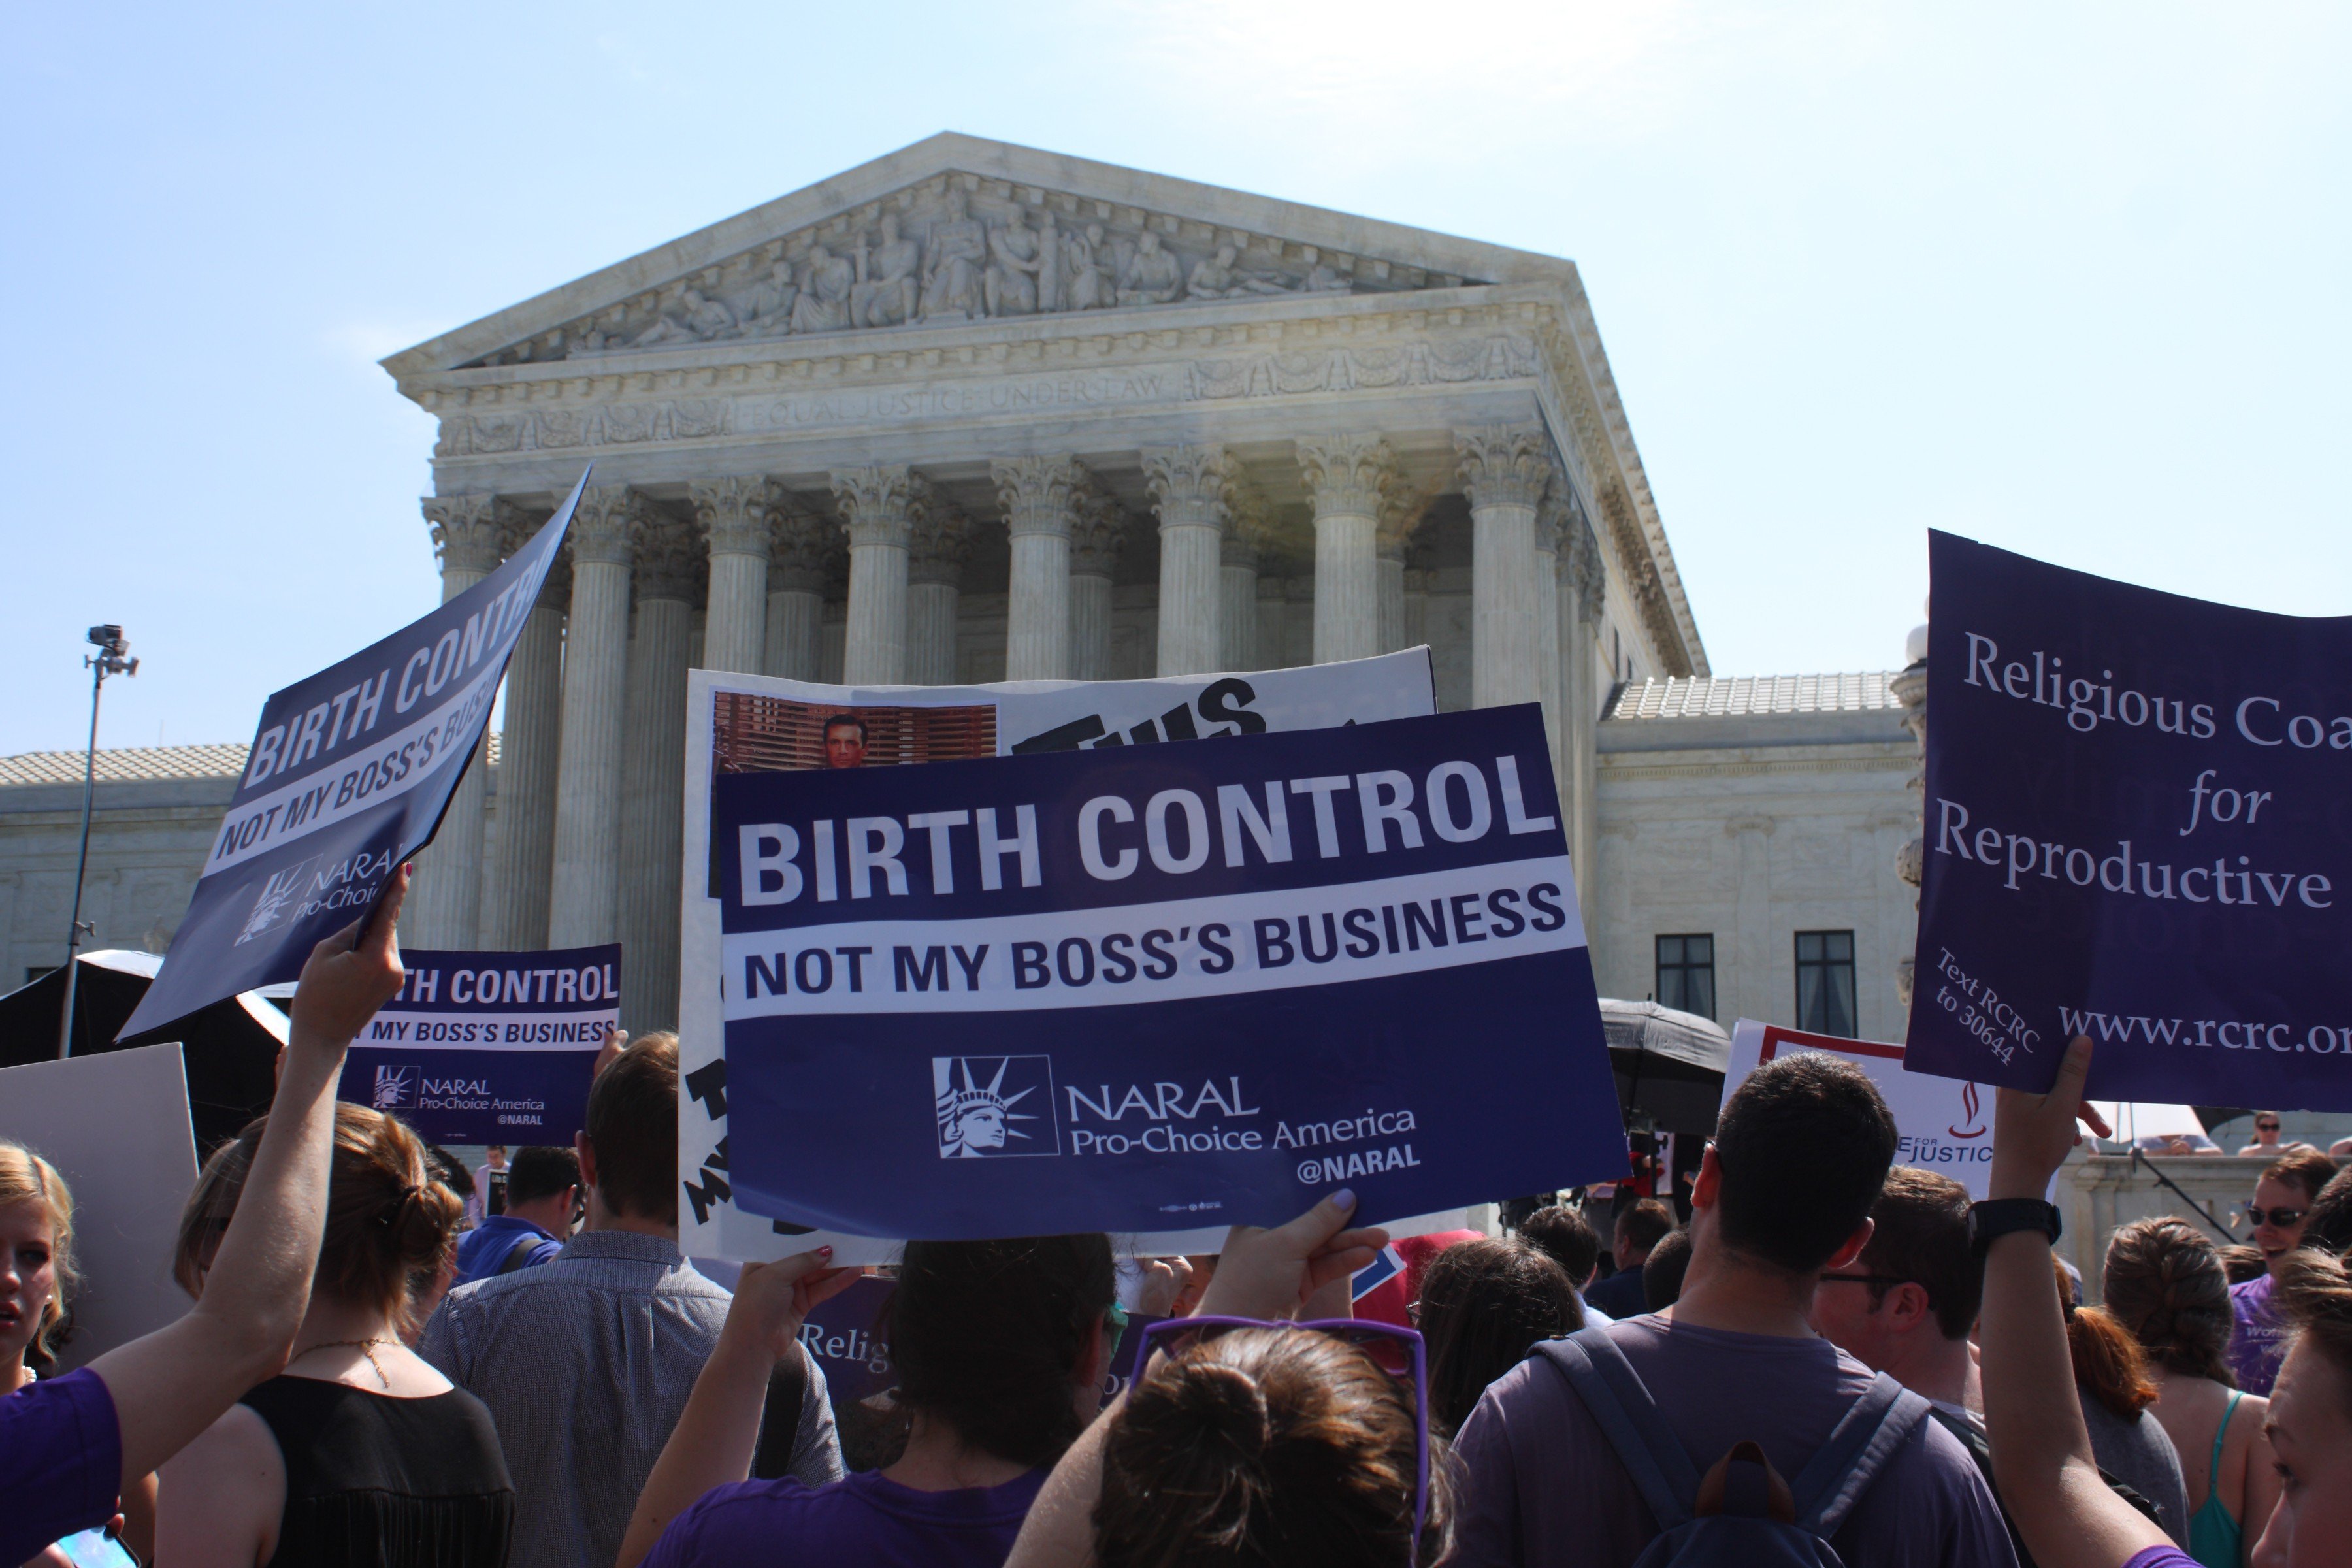 People with signs outside the Supreme Court building await a ruling in Burwell v. Hobby Lobby on June 30, 2014 in Washington. (Evan Golub—Demotix/Corbis)